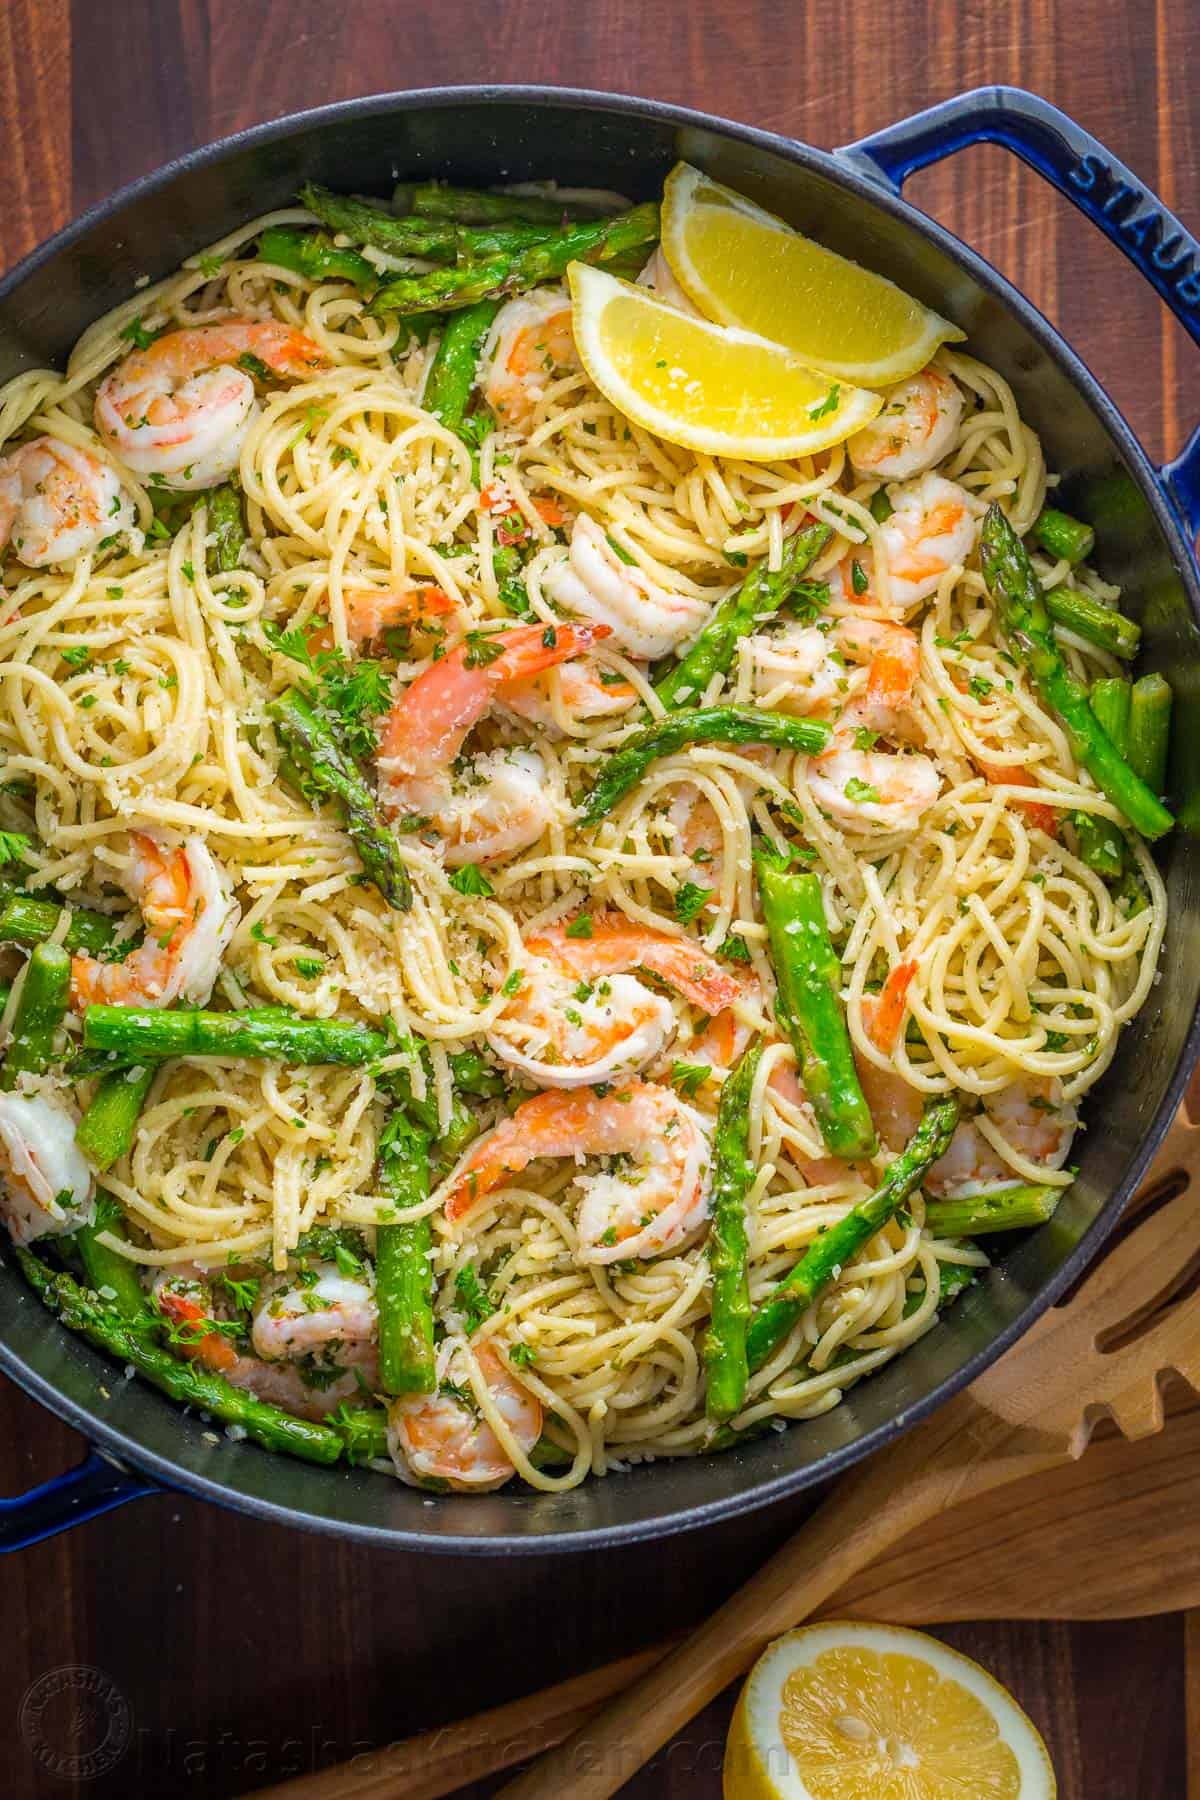 Shrimp Scampi Pasta with asparagus in a pan garnished with lemon wedges